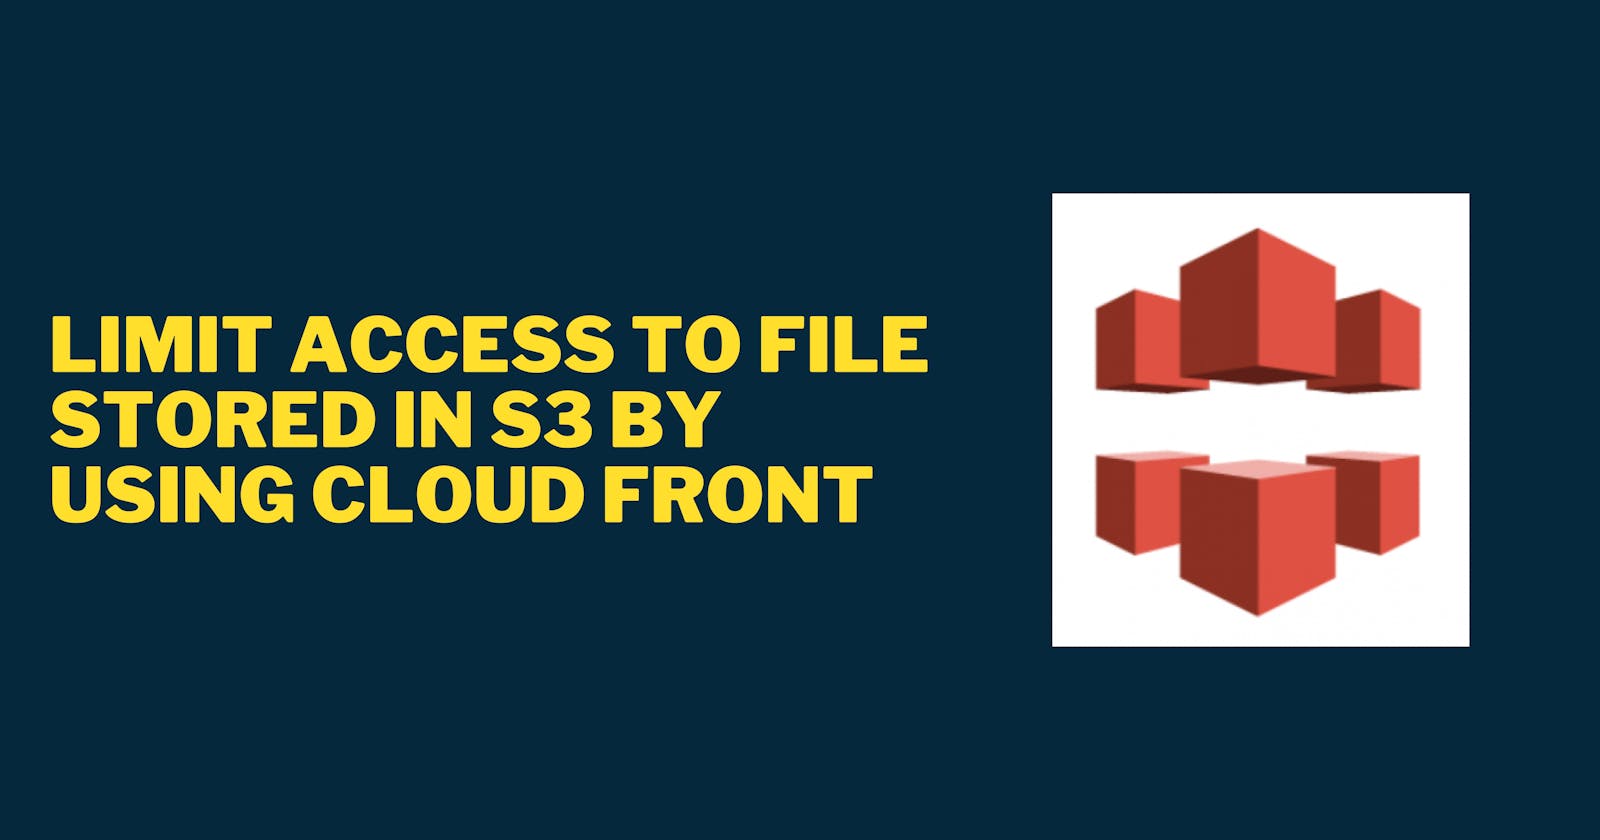 Limit access to file stored in S3 by using Cloud Front